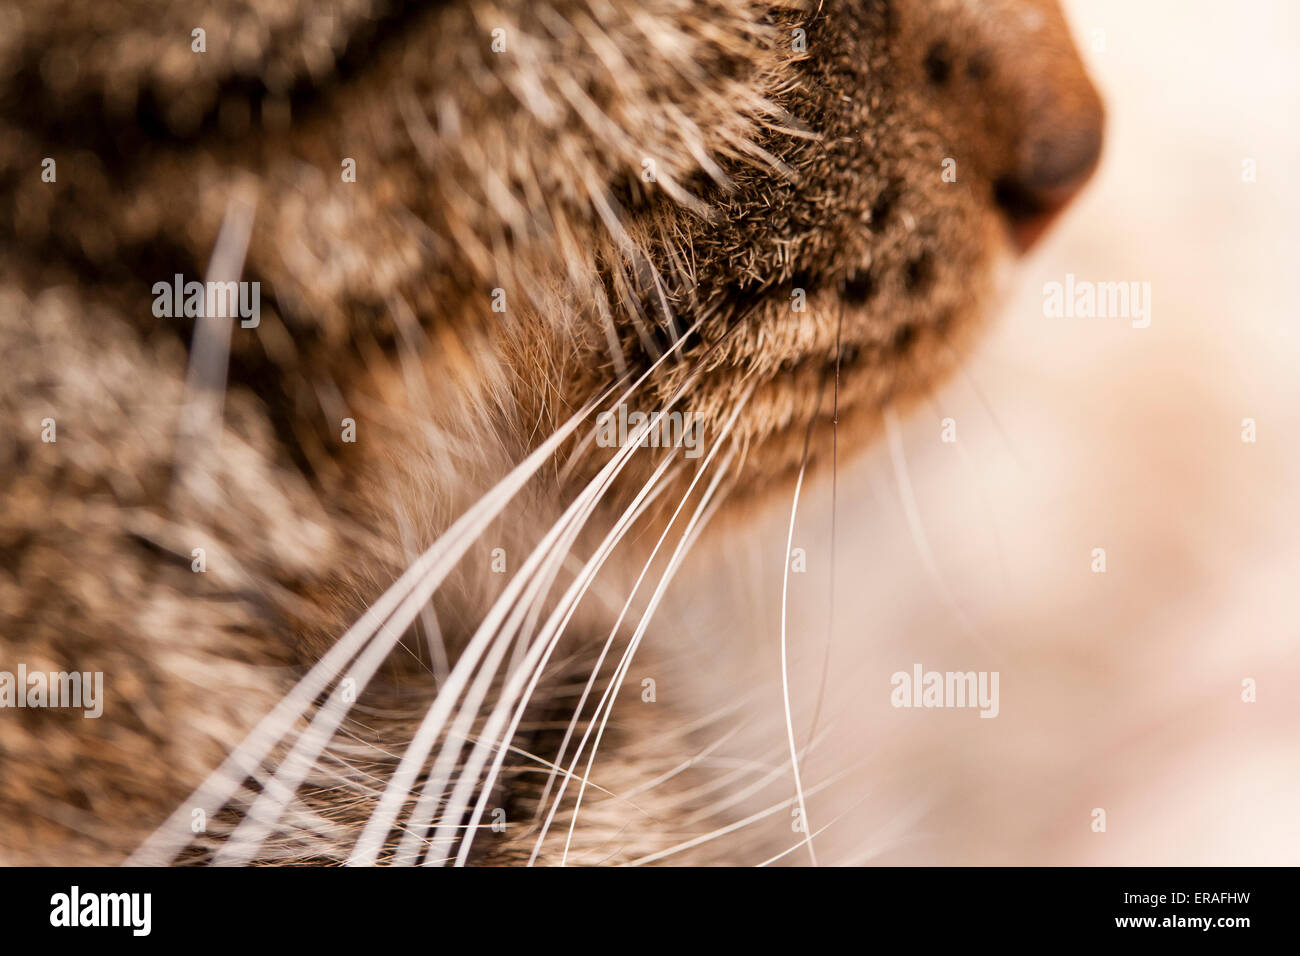 A close-up of a Tabby cats whiskers and nose from the side. Stock Photo